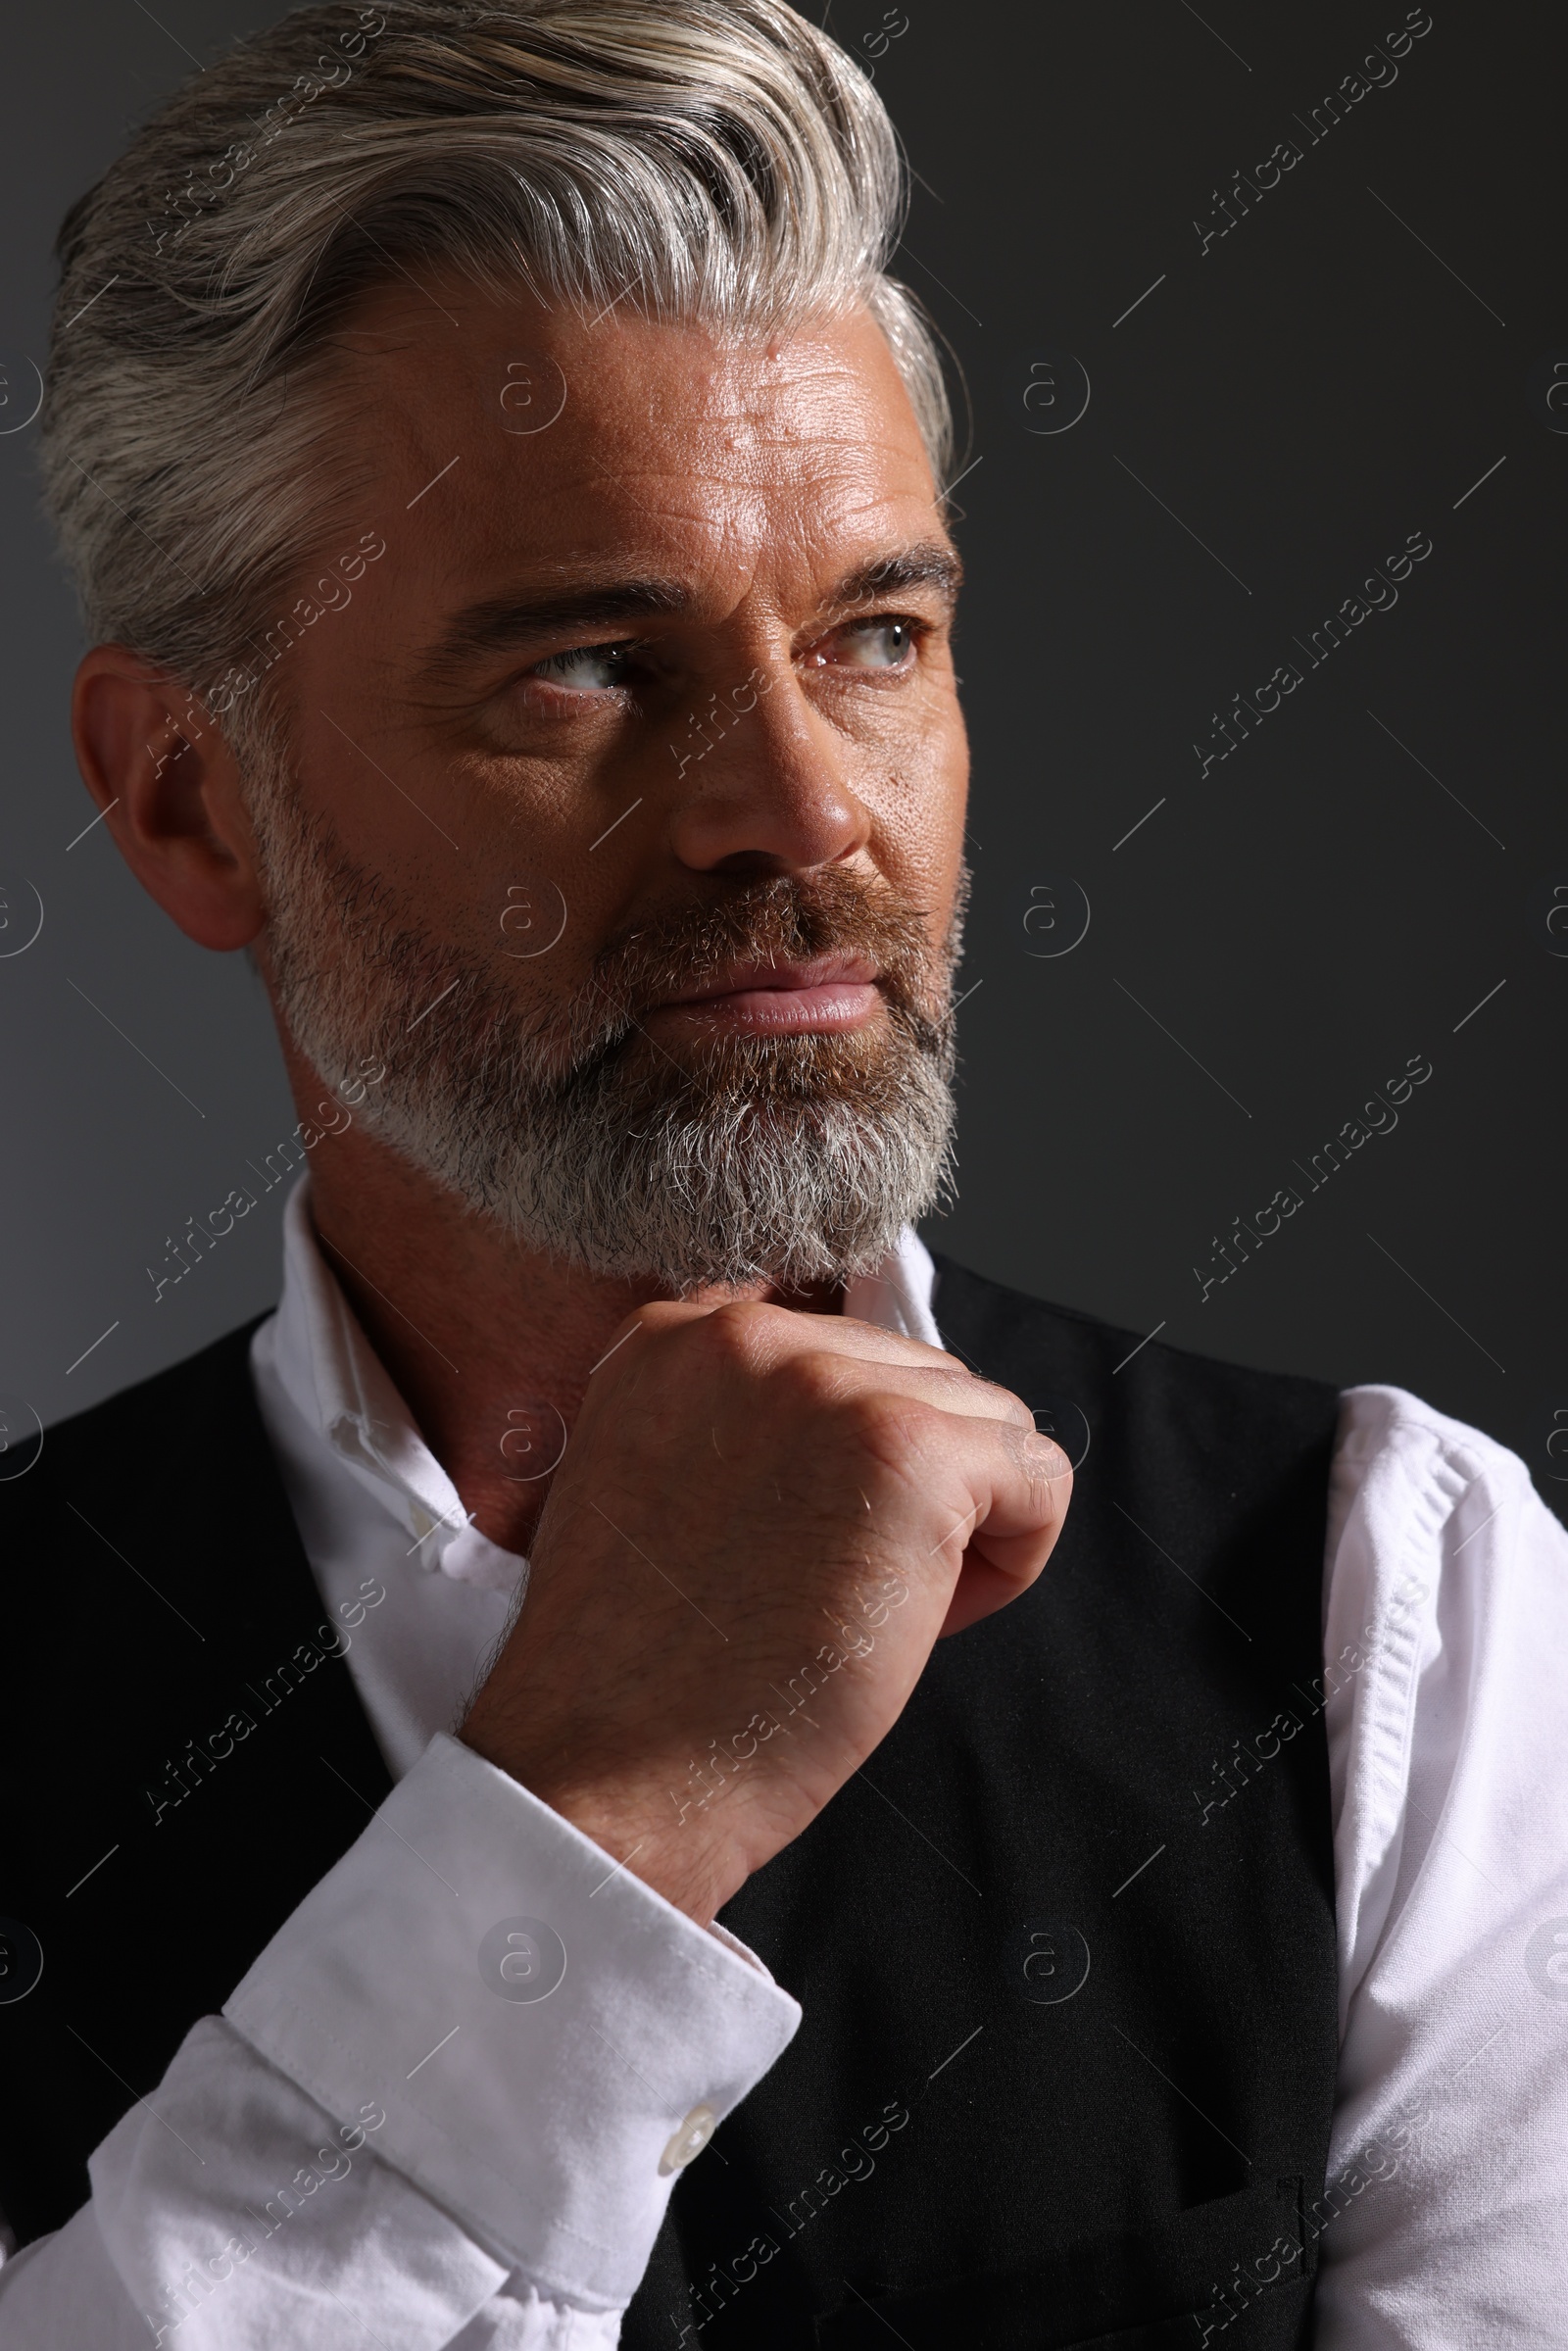 Photo of Portraitconfident man with beautiful hairstyle on dark background